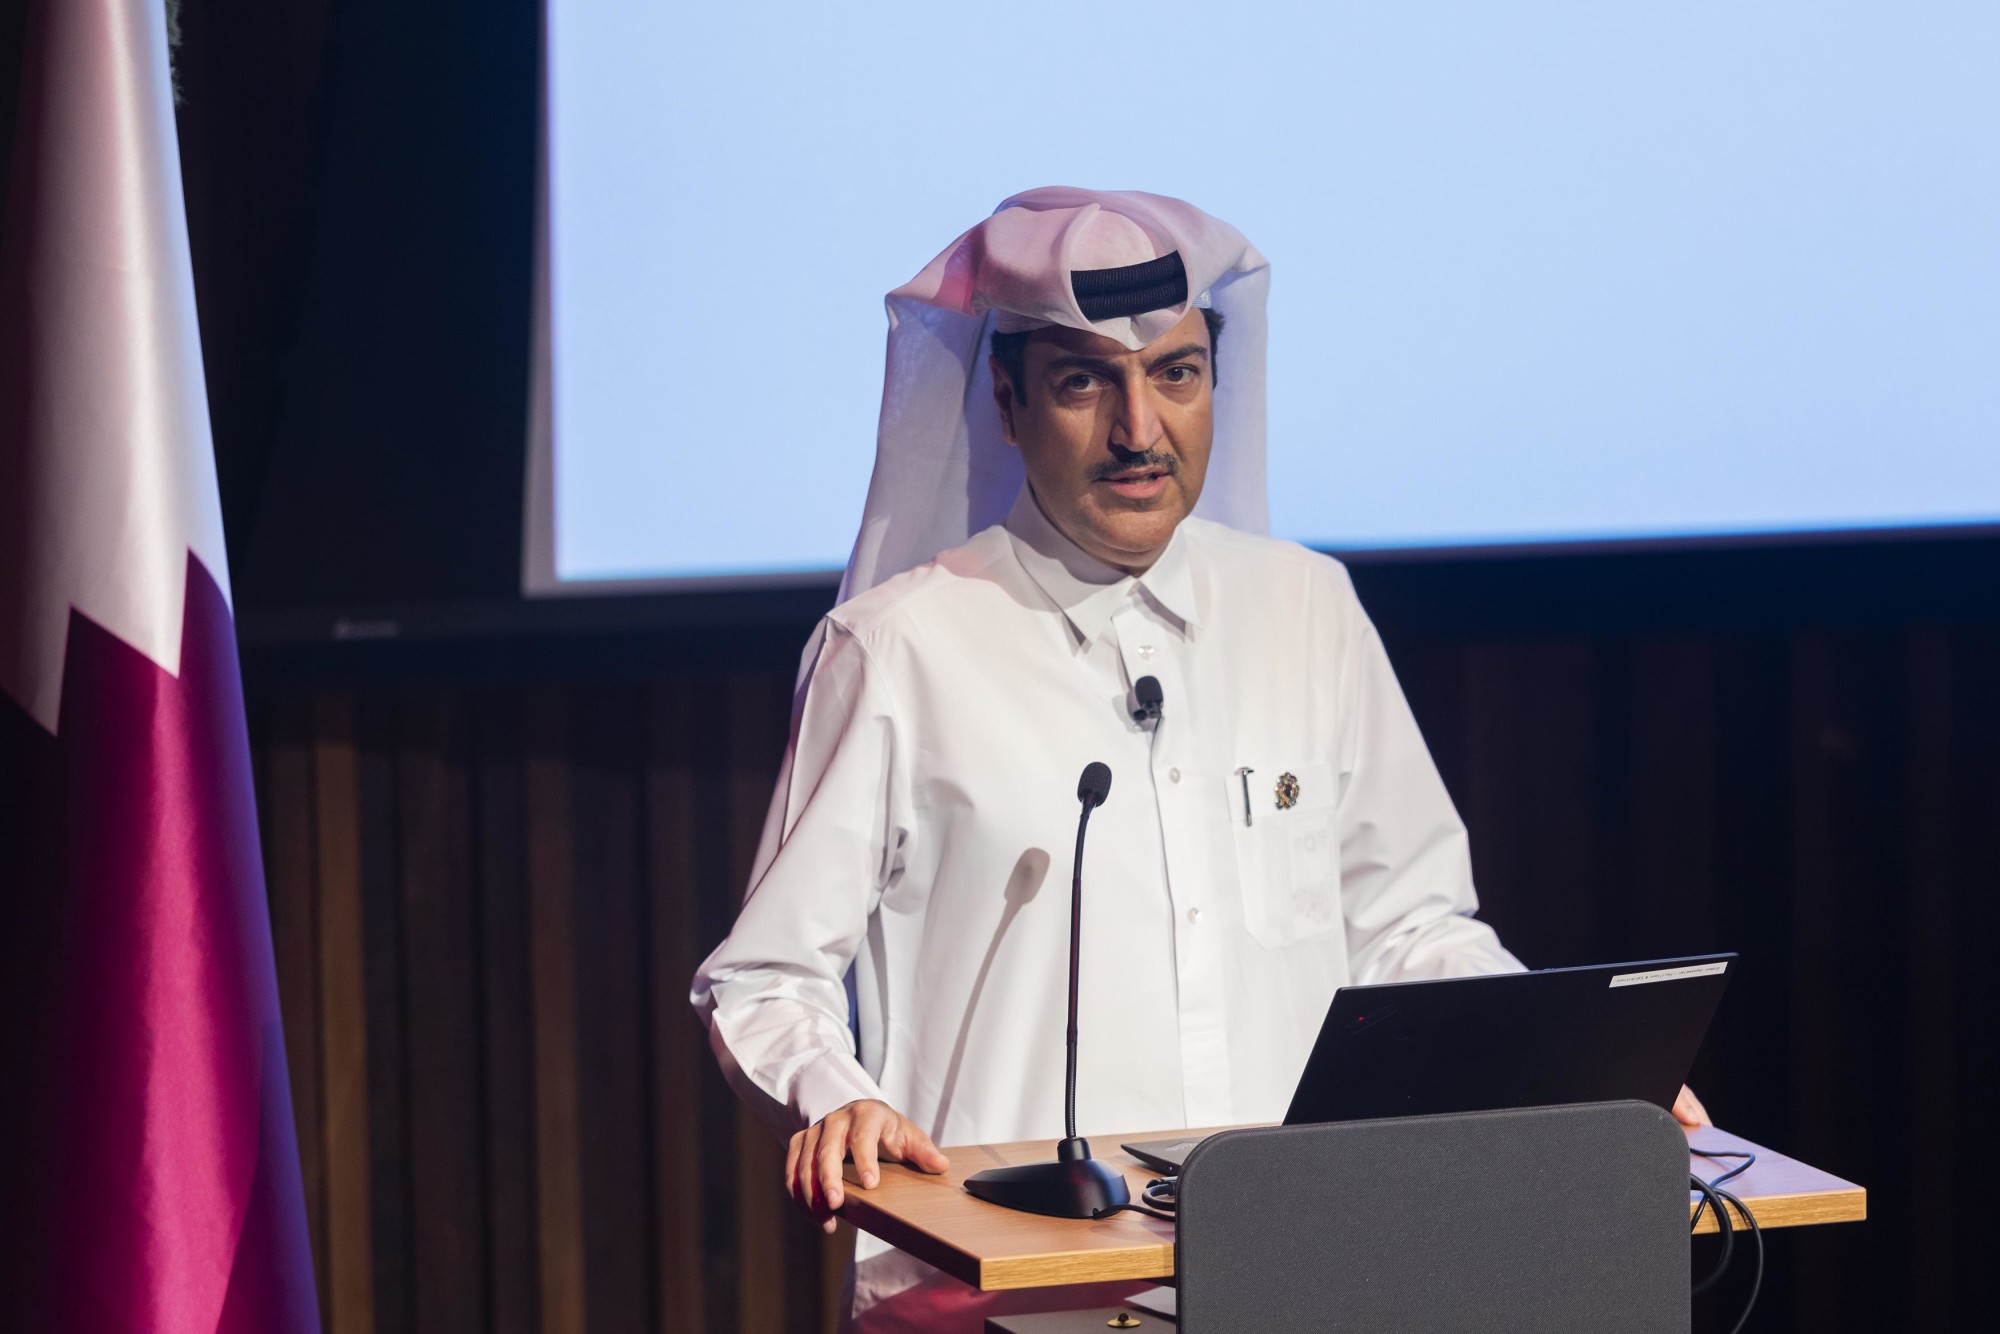 Mohammed Ali Alkhoori, Secretary General of Expo 2023 Doha speaks during Expo 2023 Doha, Qatar Horticultural launch event at Terra the Auditorium m14582